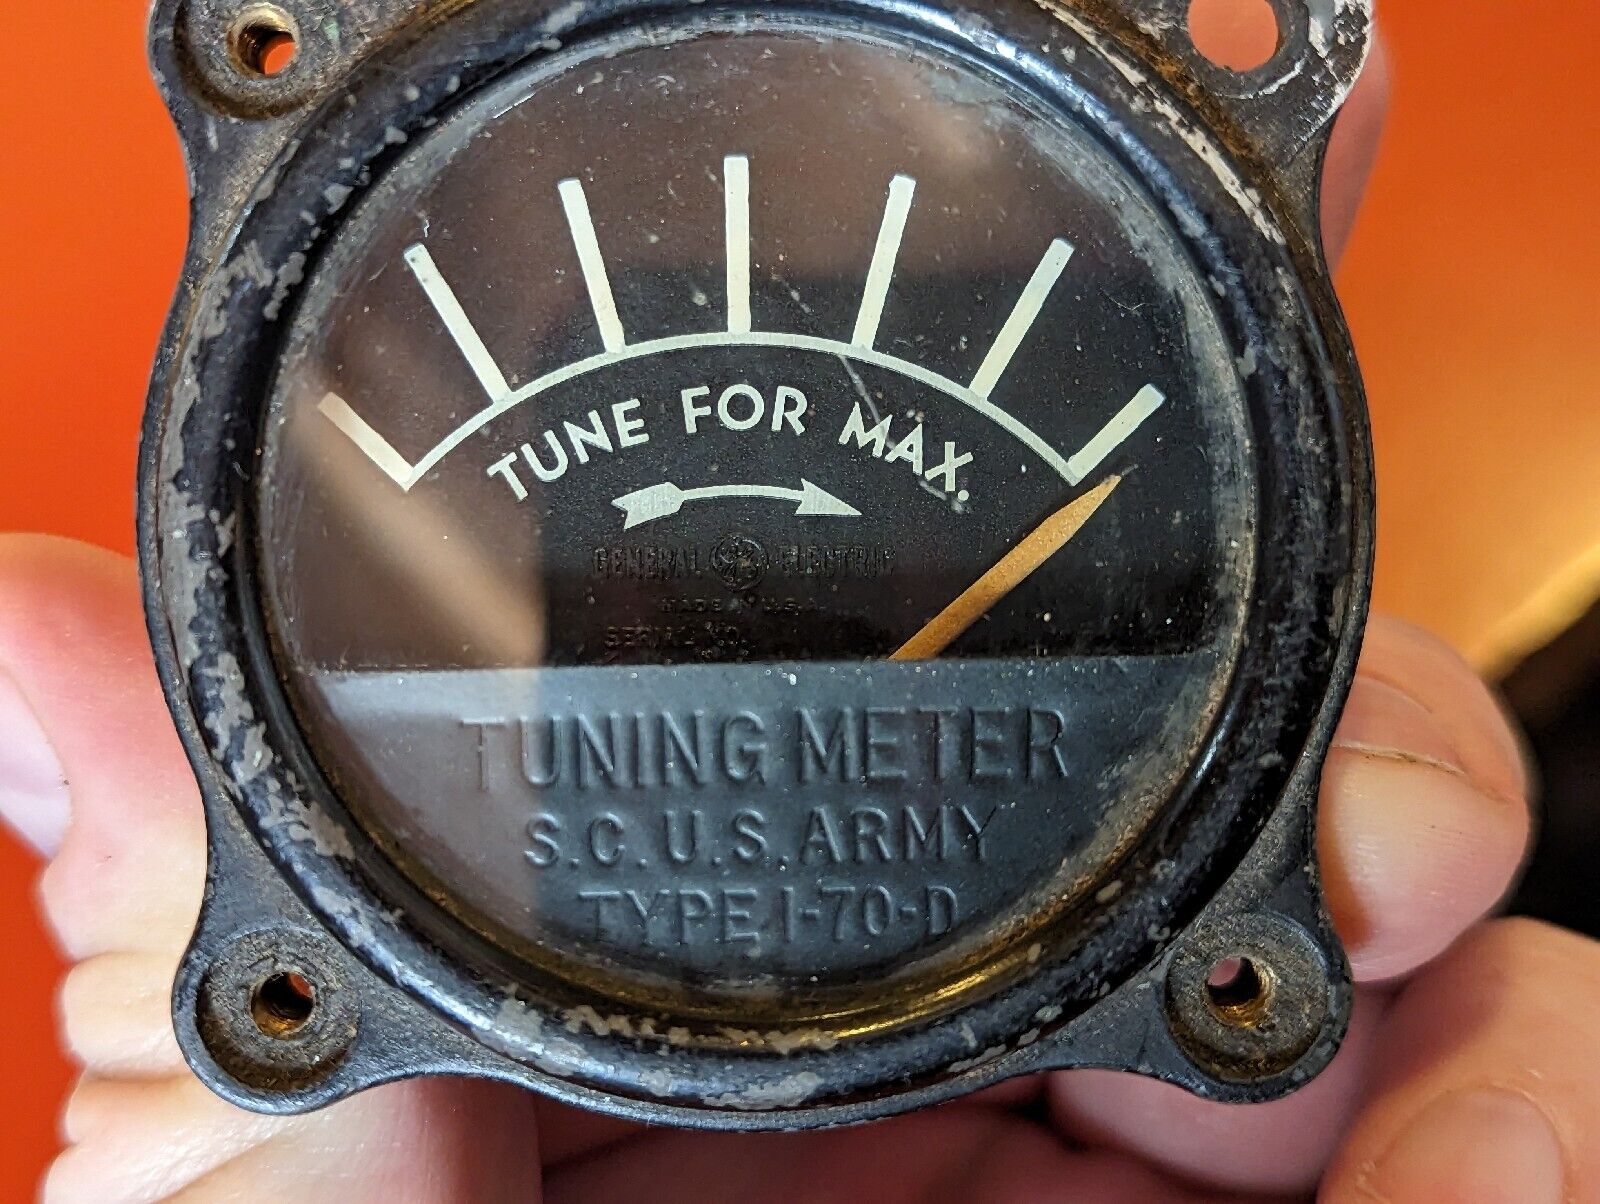 Vintage TUNE FOR MAX. S.C U.S Army Tuning Meter Type I-70-D GAUGE, 2 1/8\